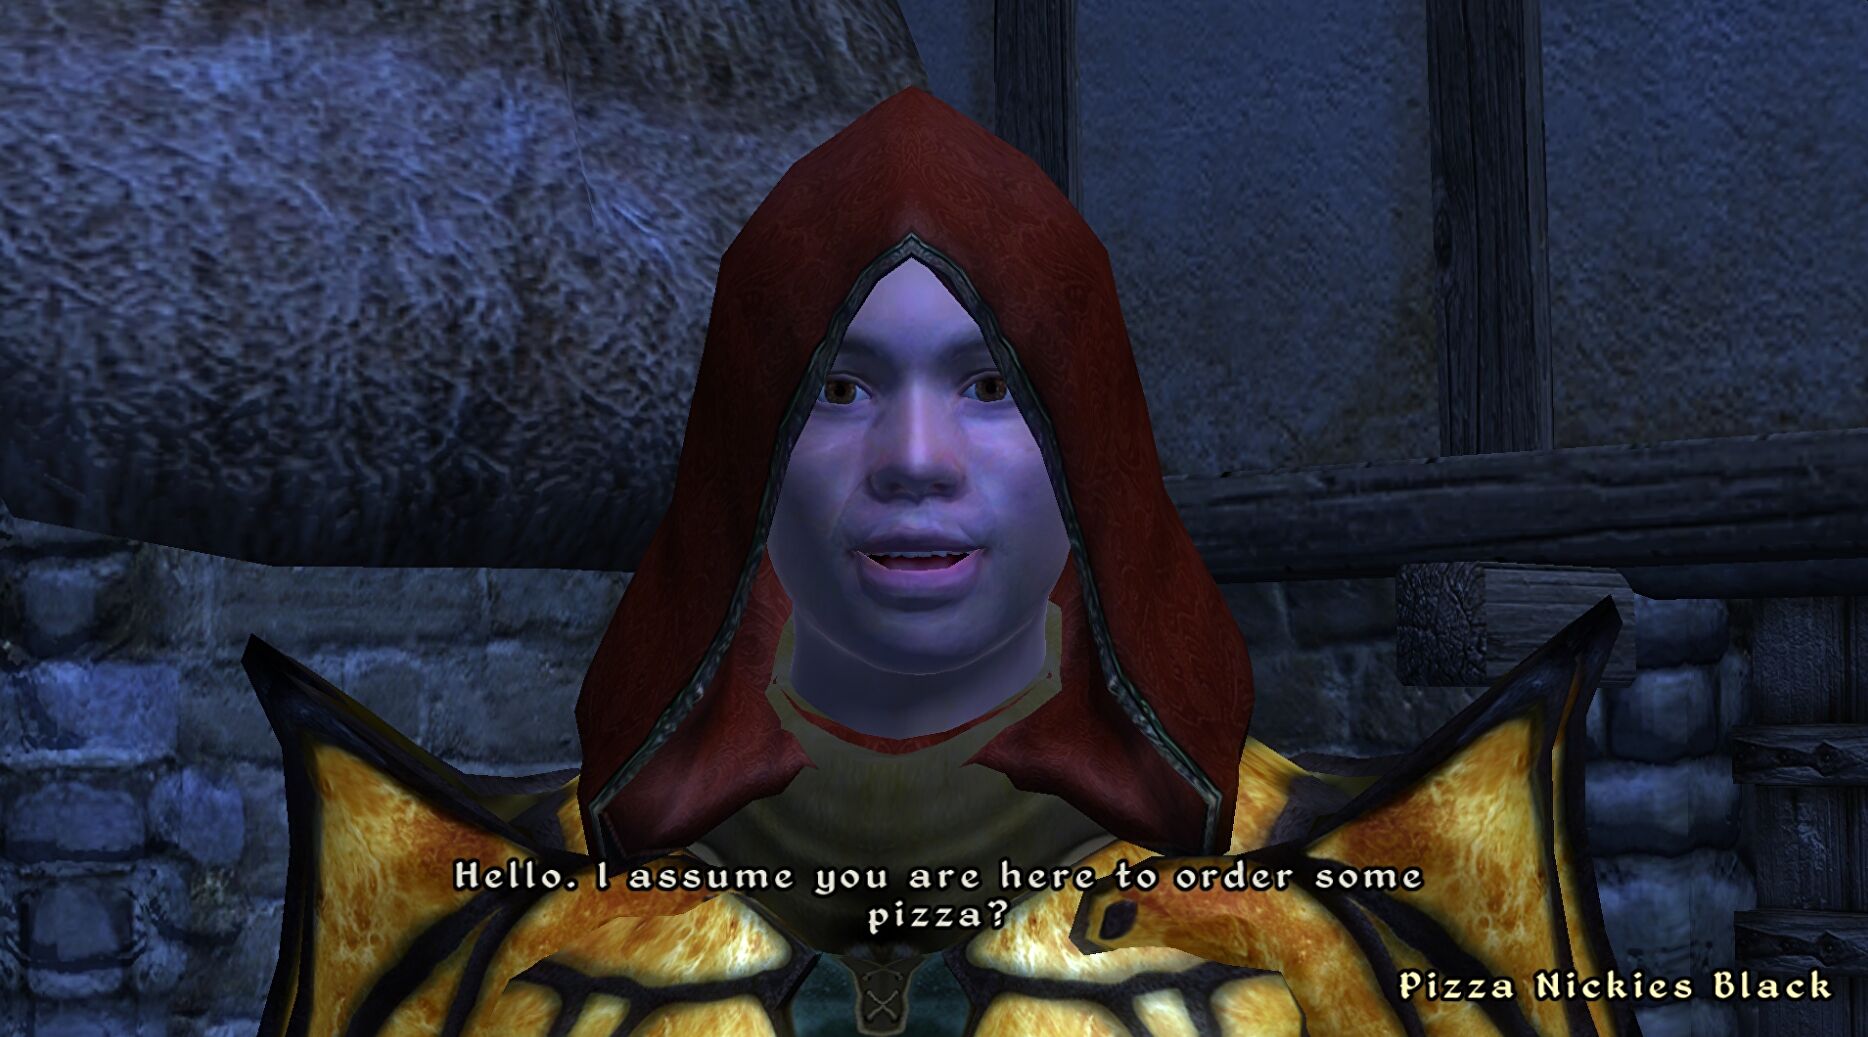 This mod allows you to order real pizza from within Oblivion